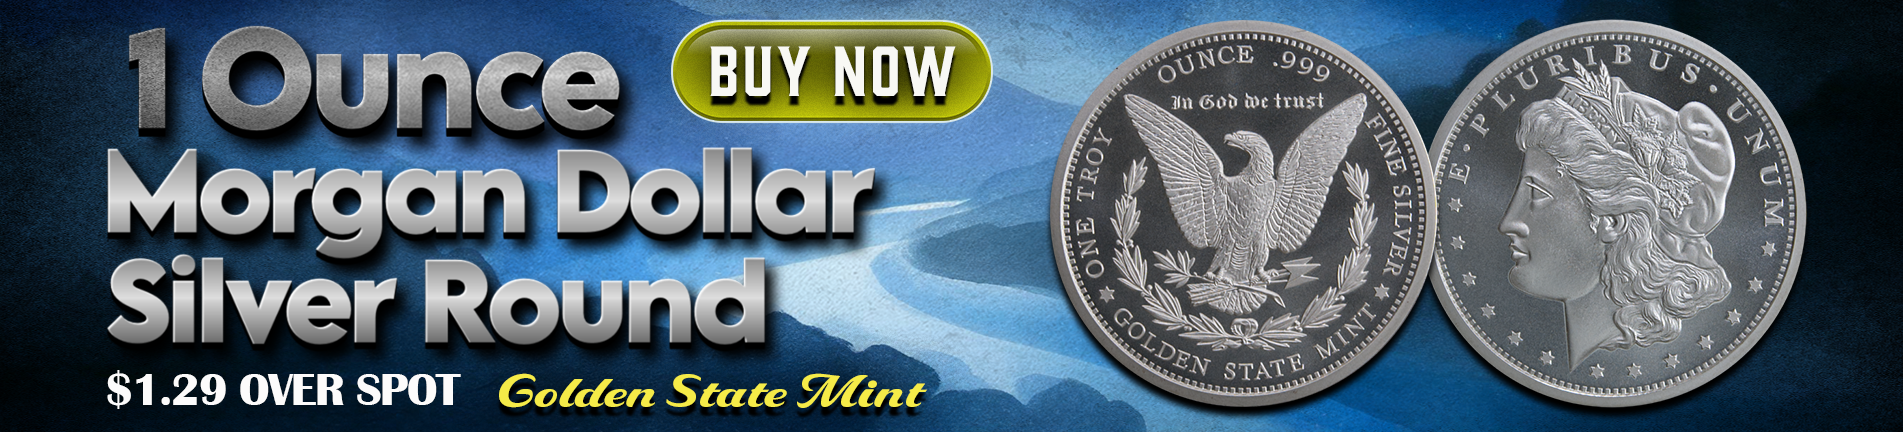 Morgan Dollar Silver Rounds Golden State Mint